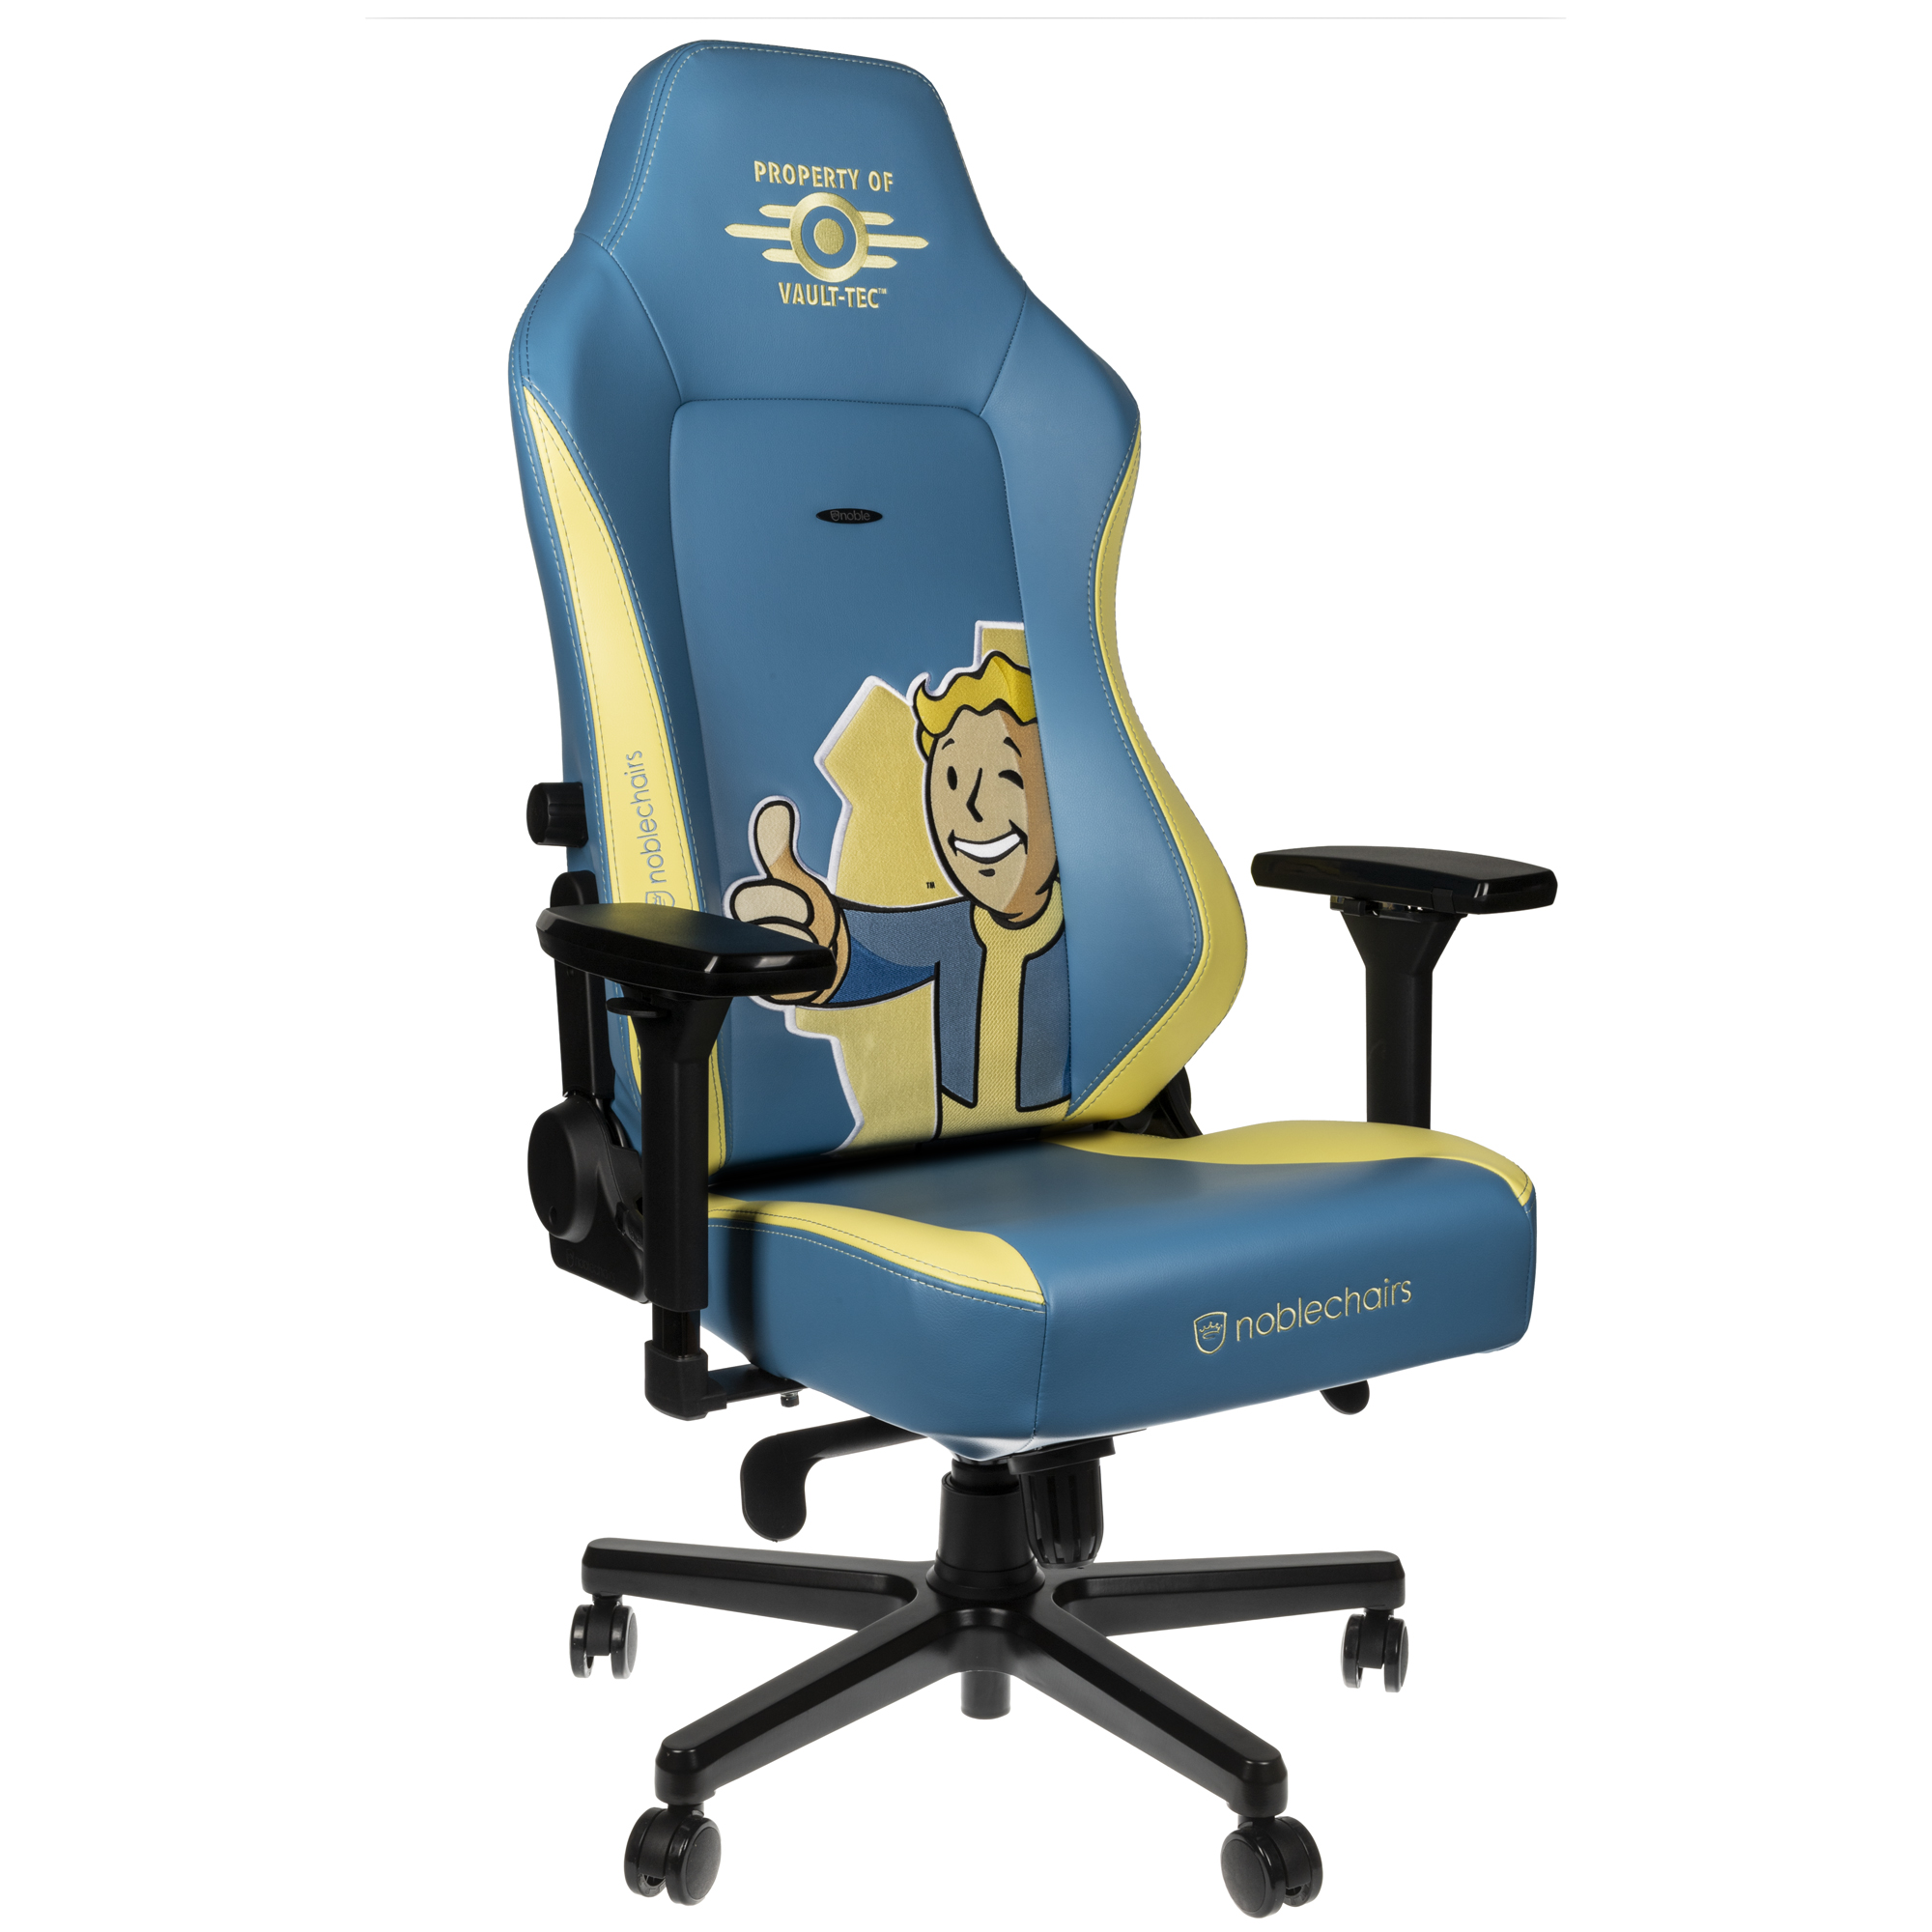 noblechairs HERO Gaming Chair - Fallout Vault-Tec Edition - Blue/Yellow